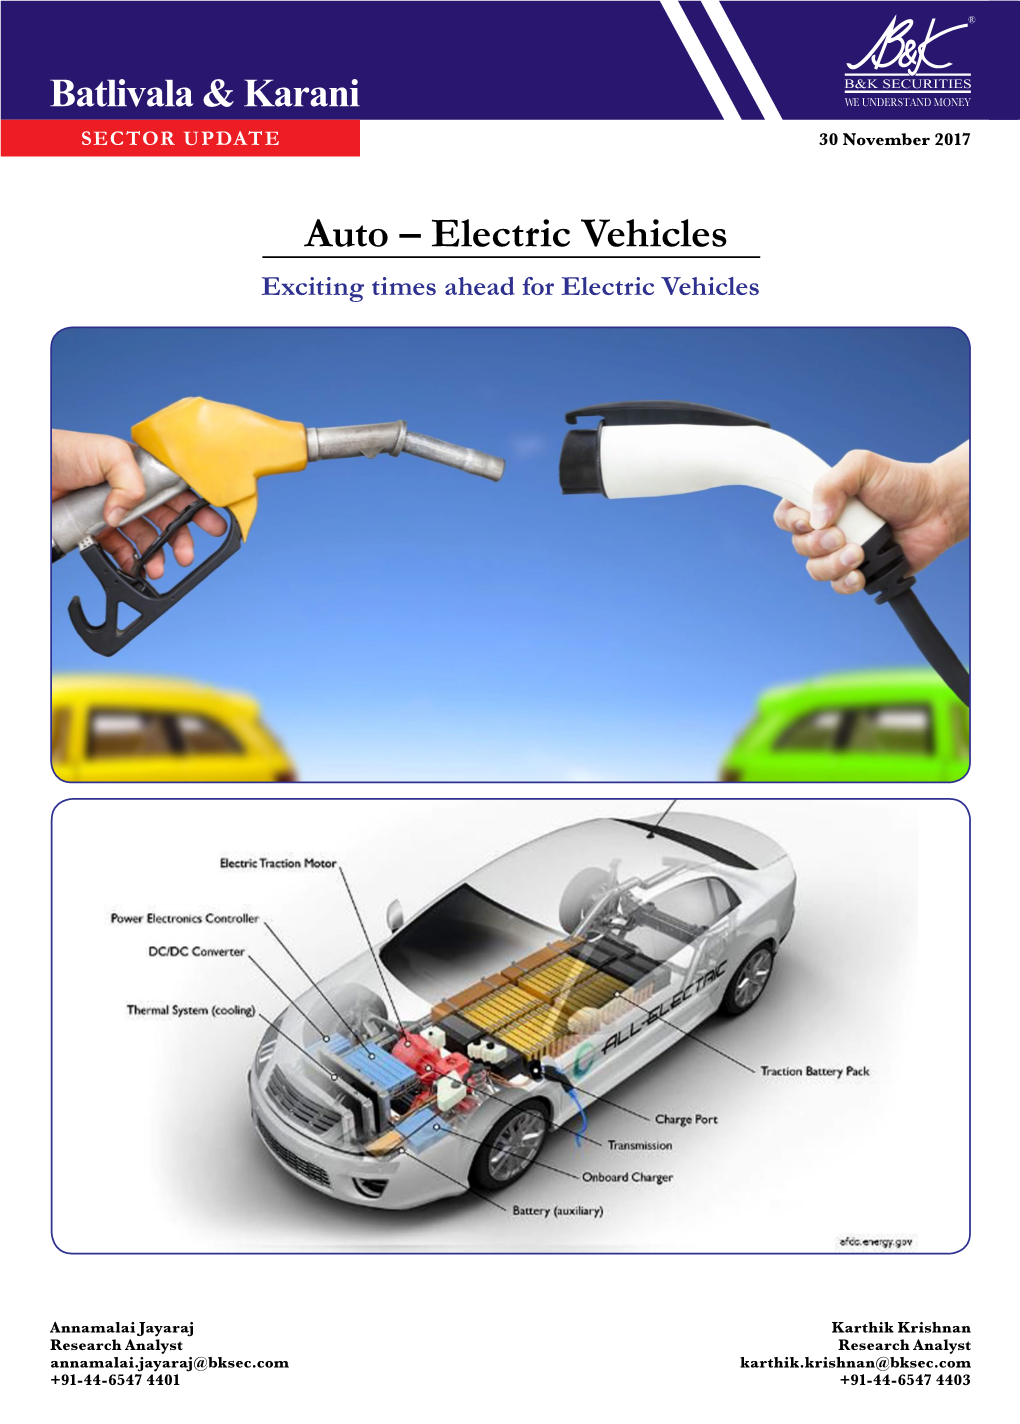 Auto – Electric Vehicles Exciting Times Ahead for Electric Vehicles